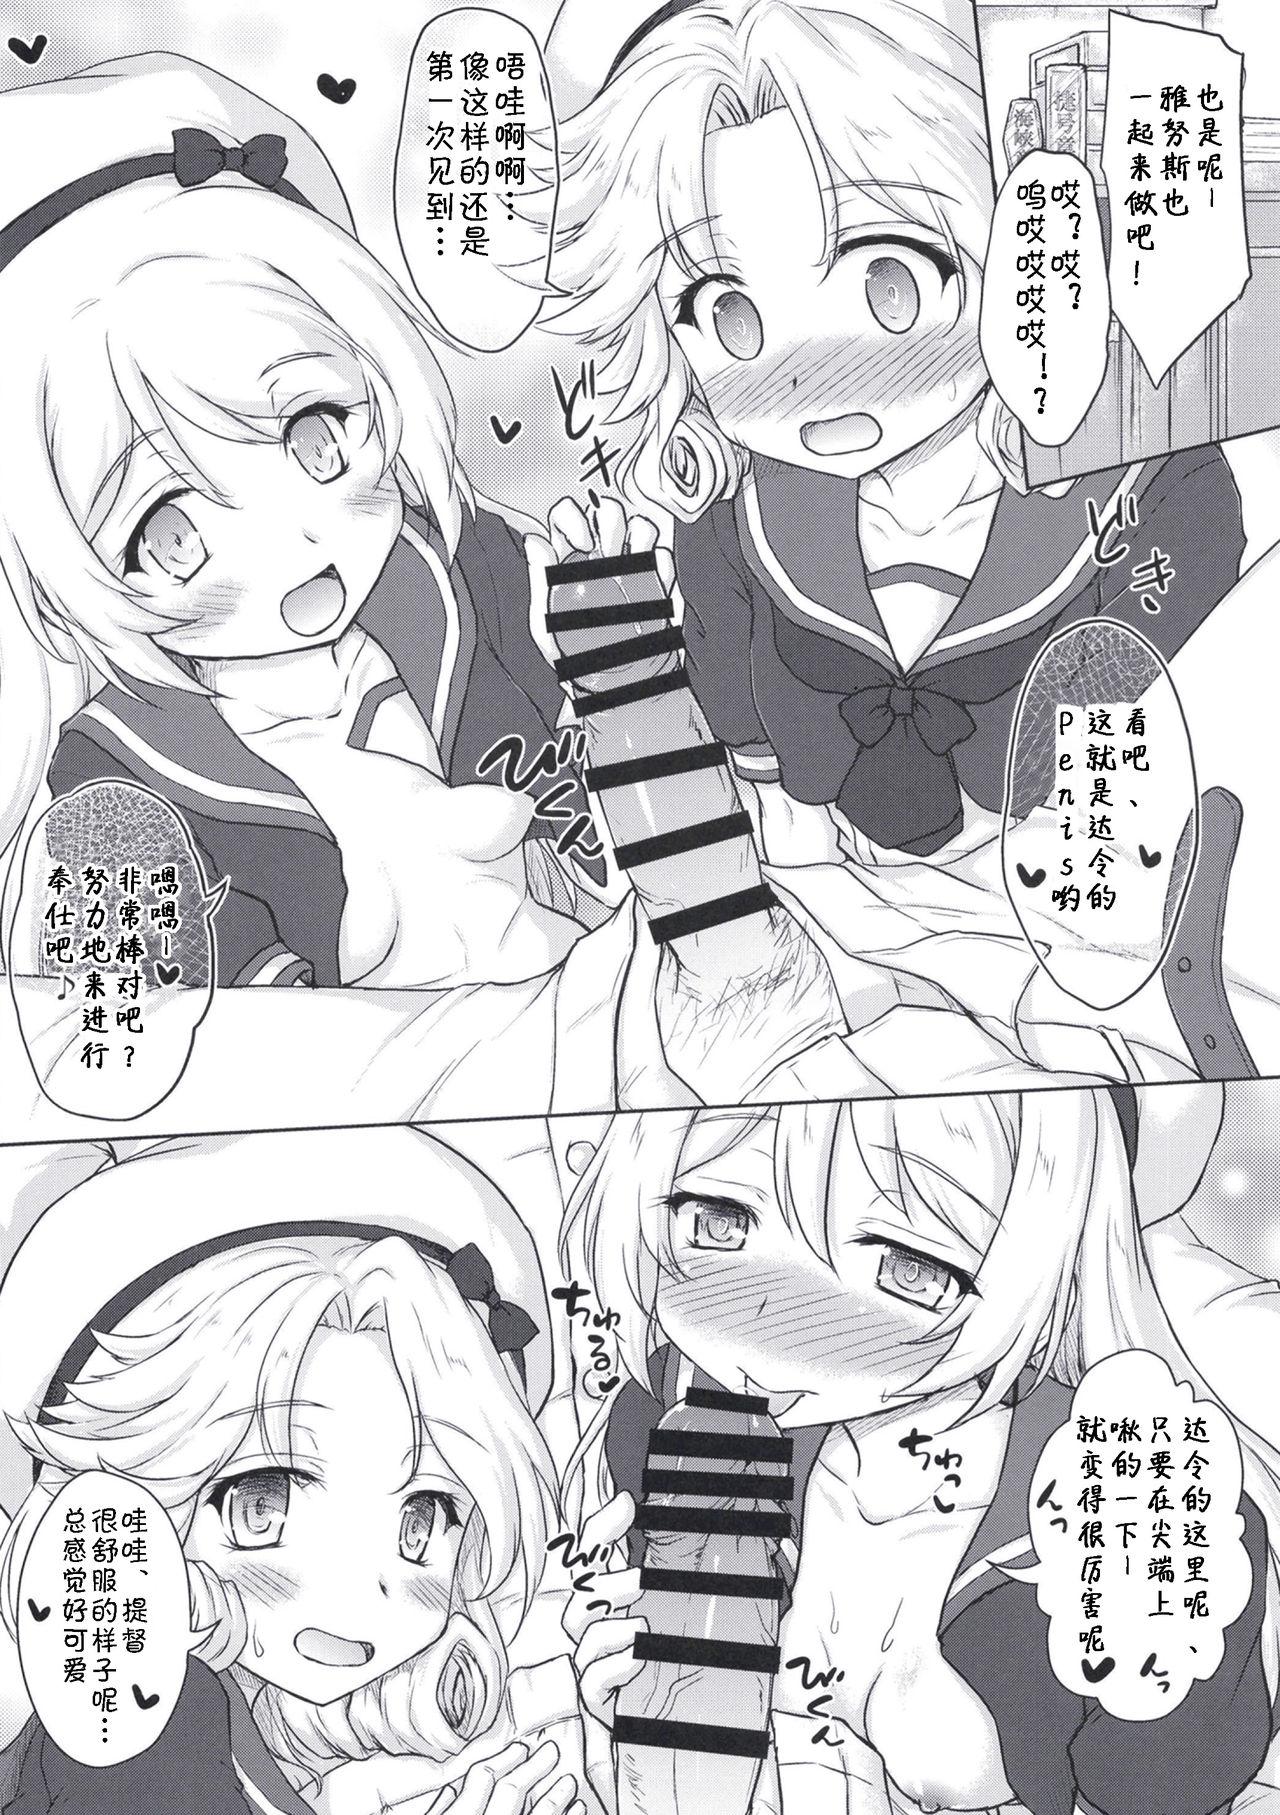 Erotic Darling is in sight! act2 - Kantai collection Footjob - Page 9